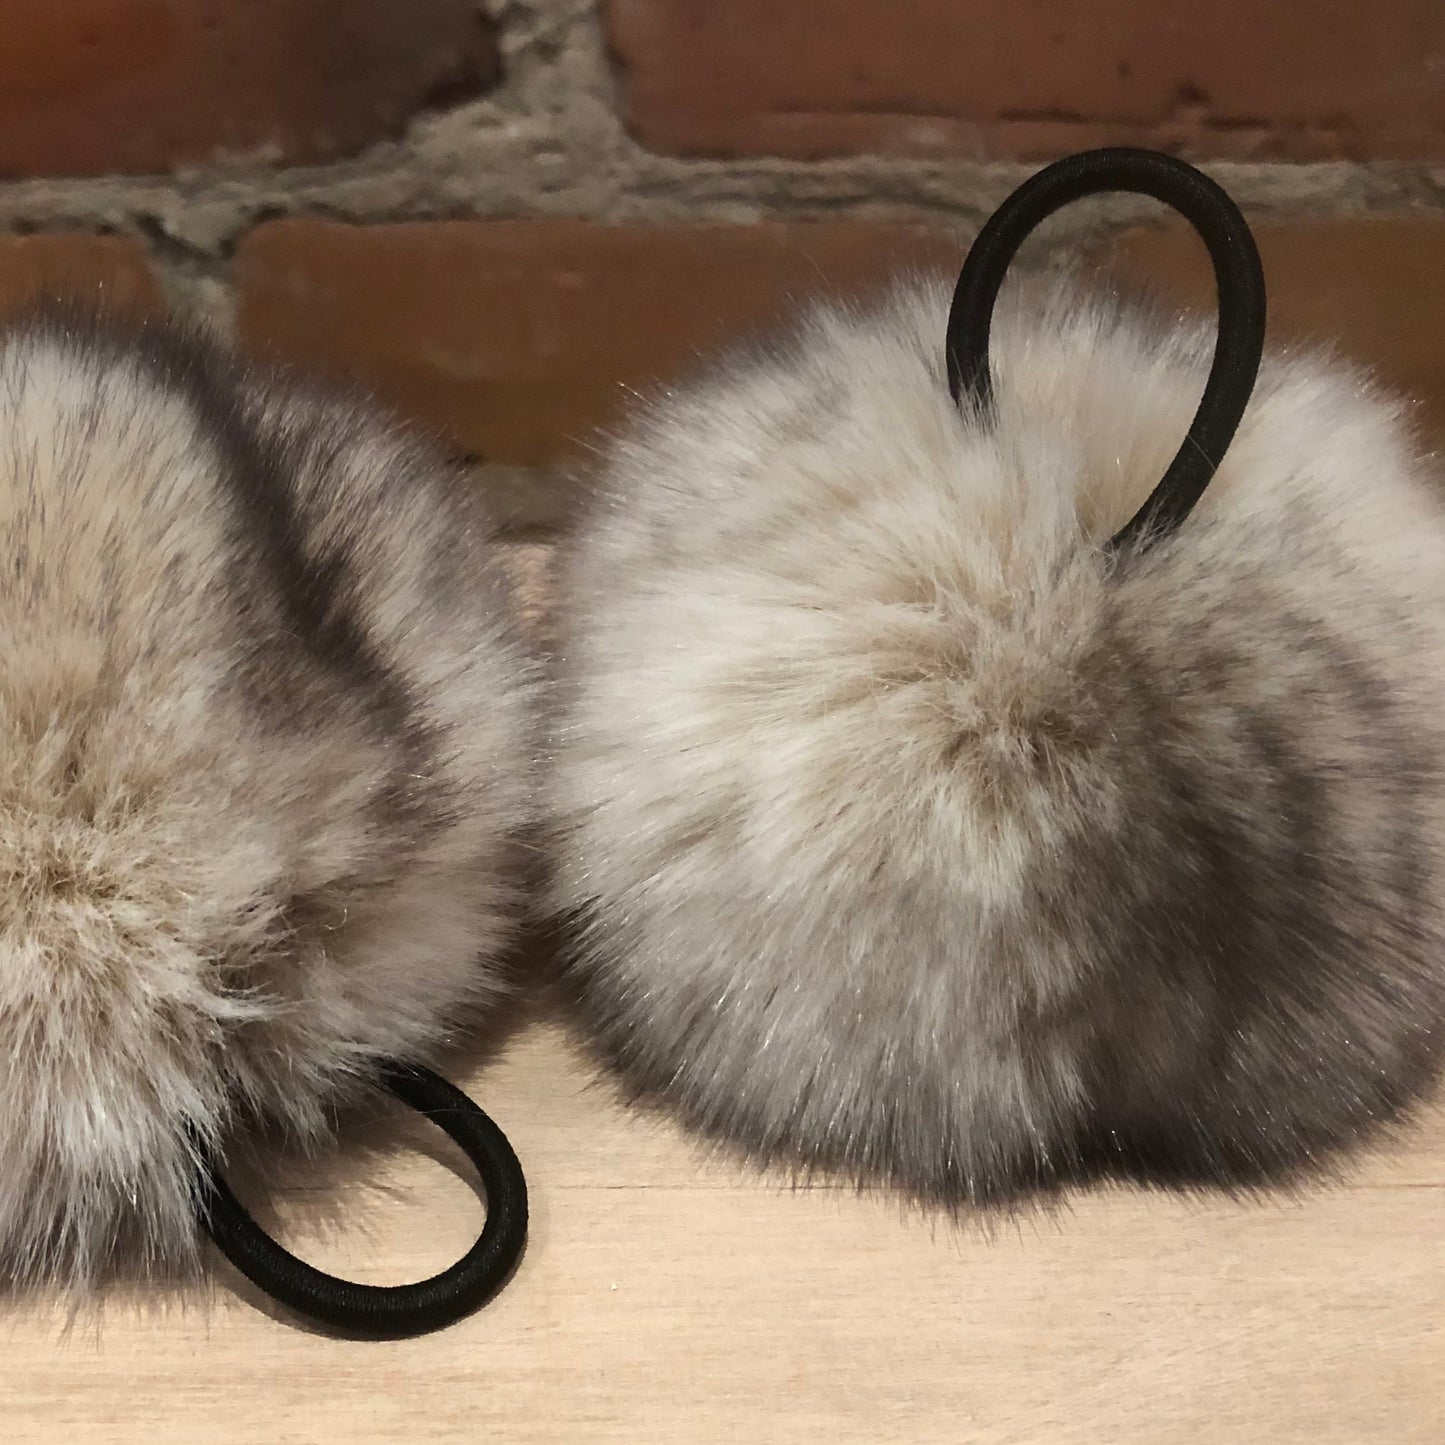 fabric covered loop attachments on beige faux fur poms